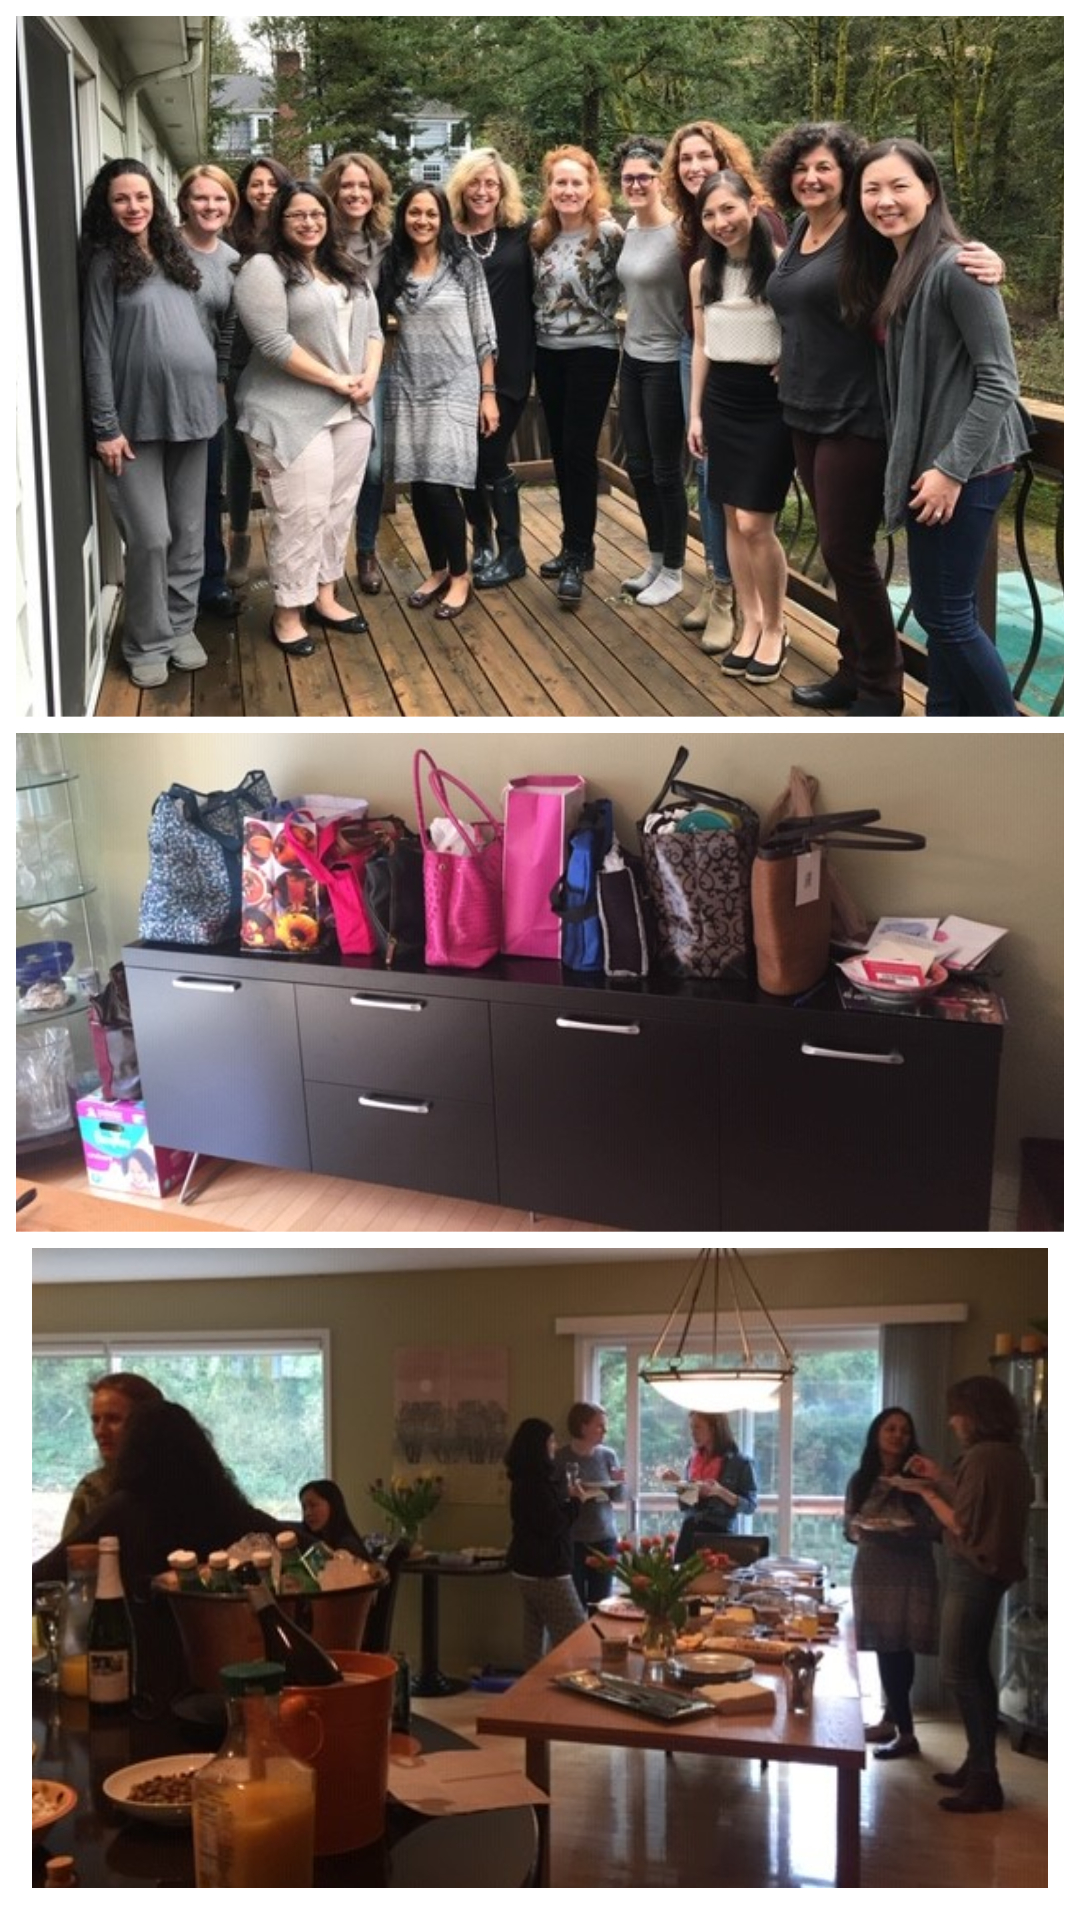 3 pictures. Top picture is group of Women standing on a deck posing for the camera, middle picture is of gift bags, bottom picture is a wide shot of women socializing in someone's home.